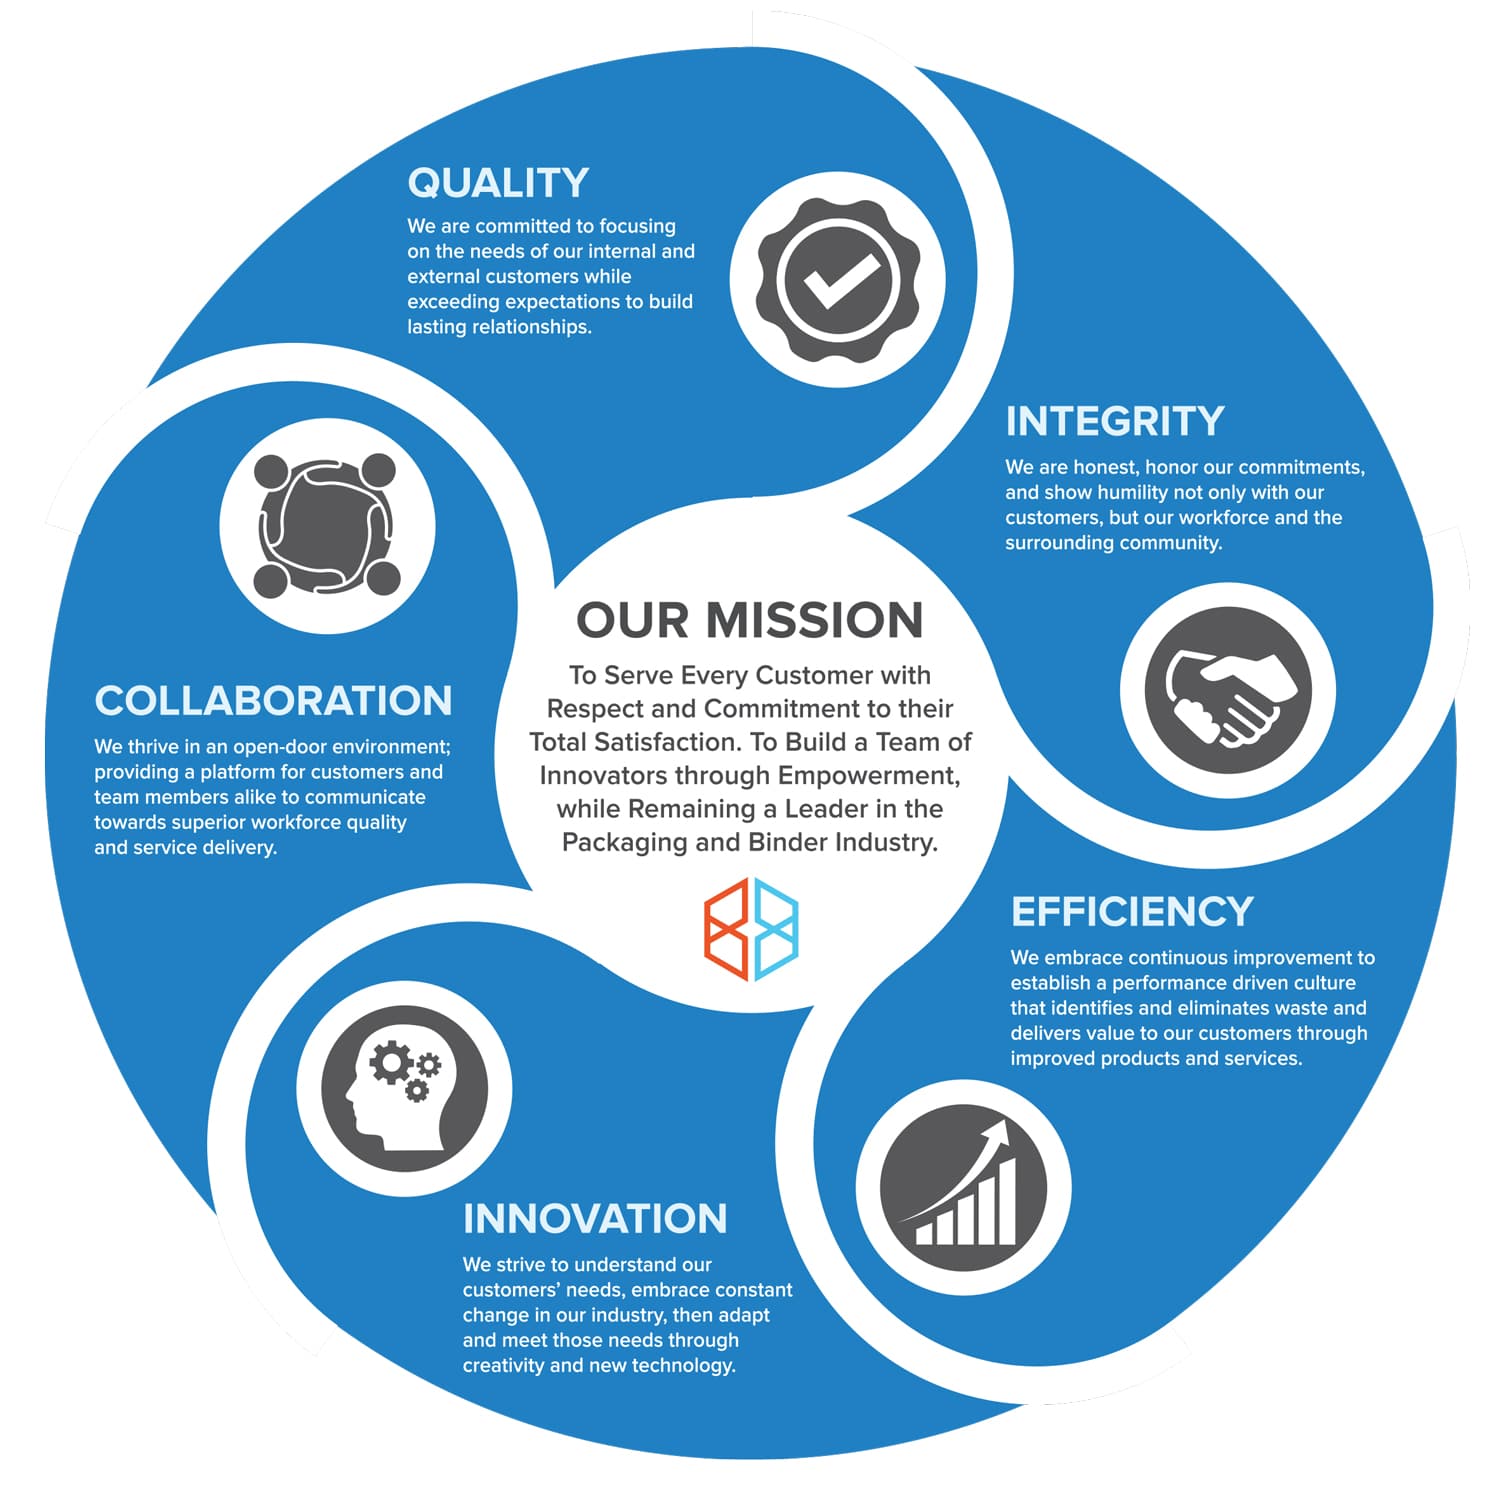 Vulcan's Mission Statement and Core Values